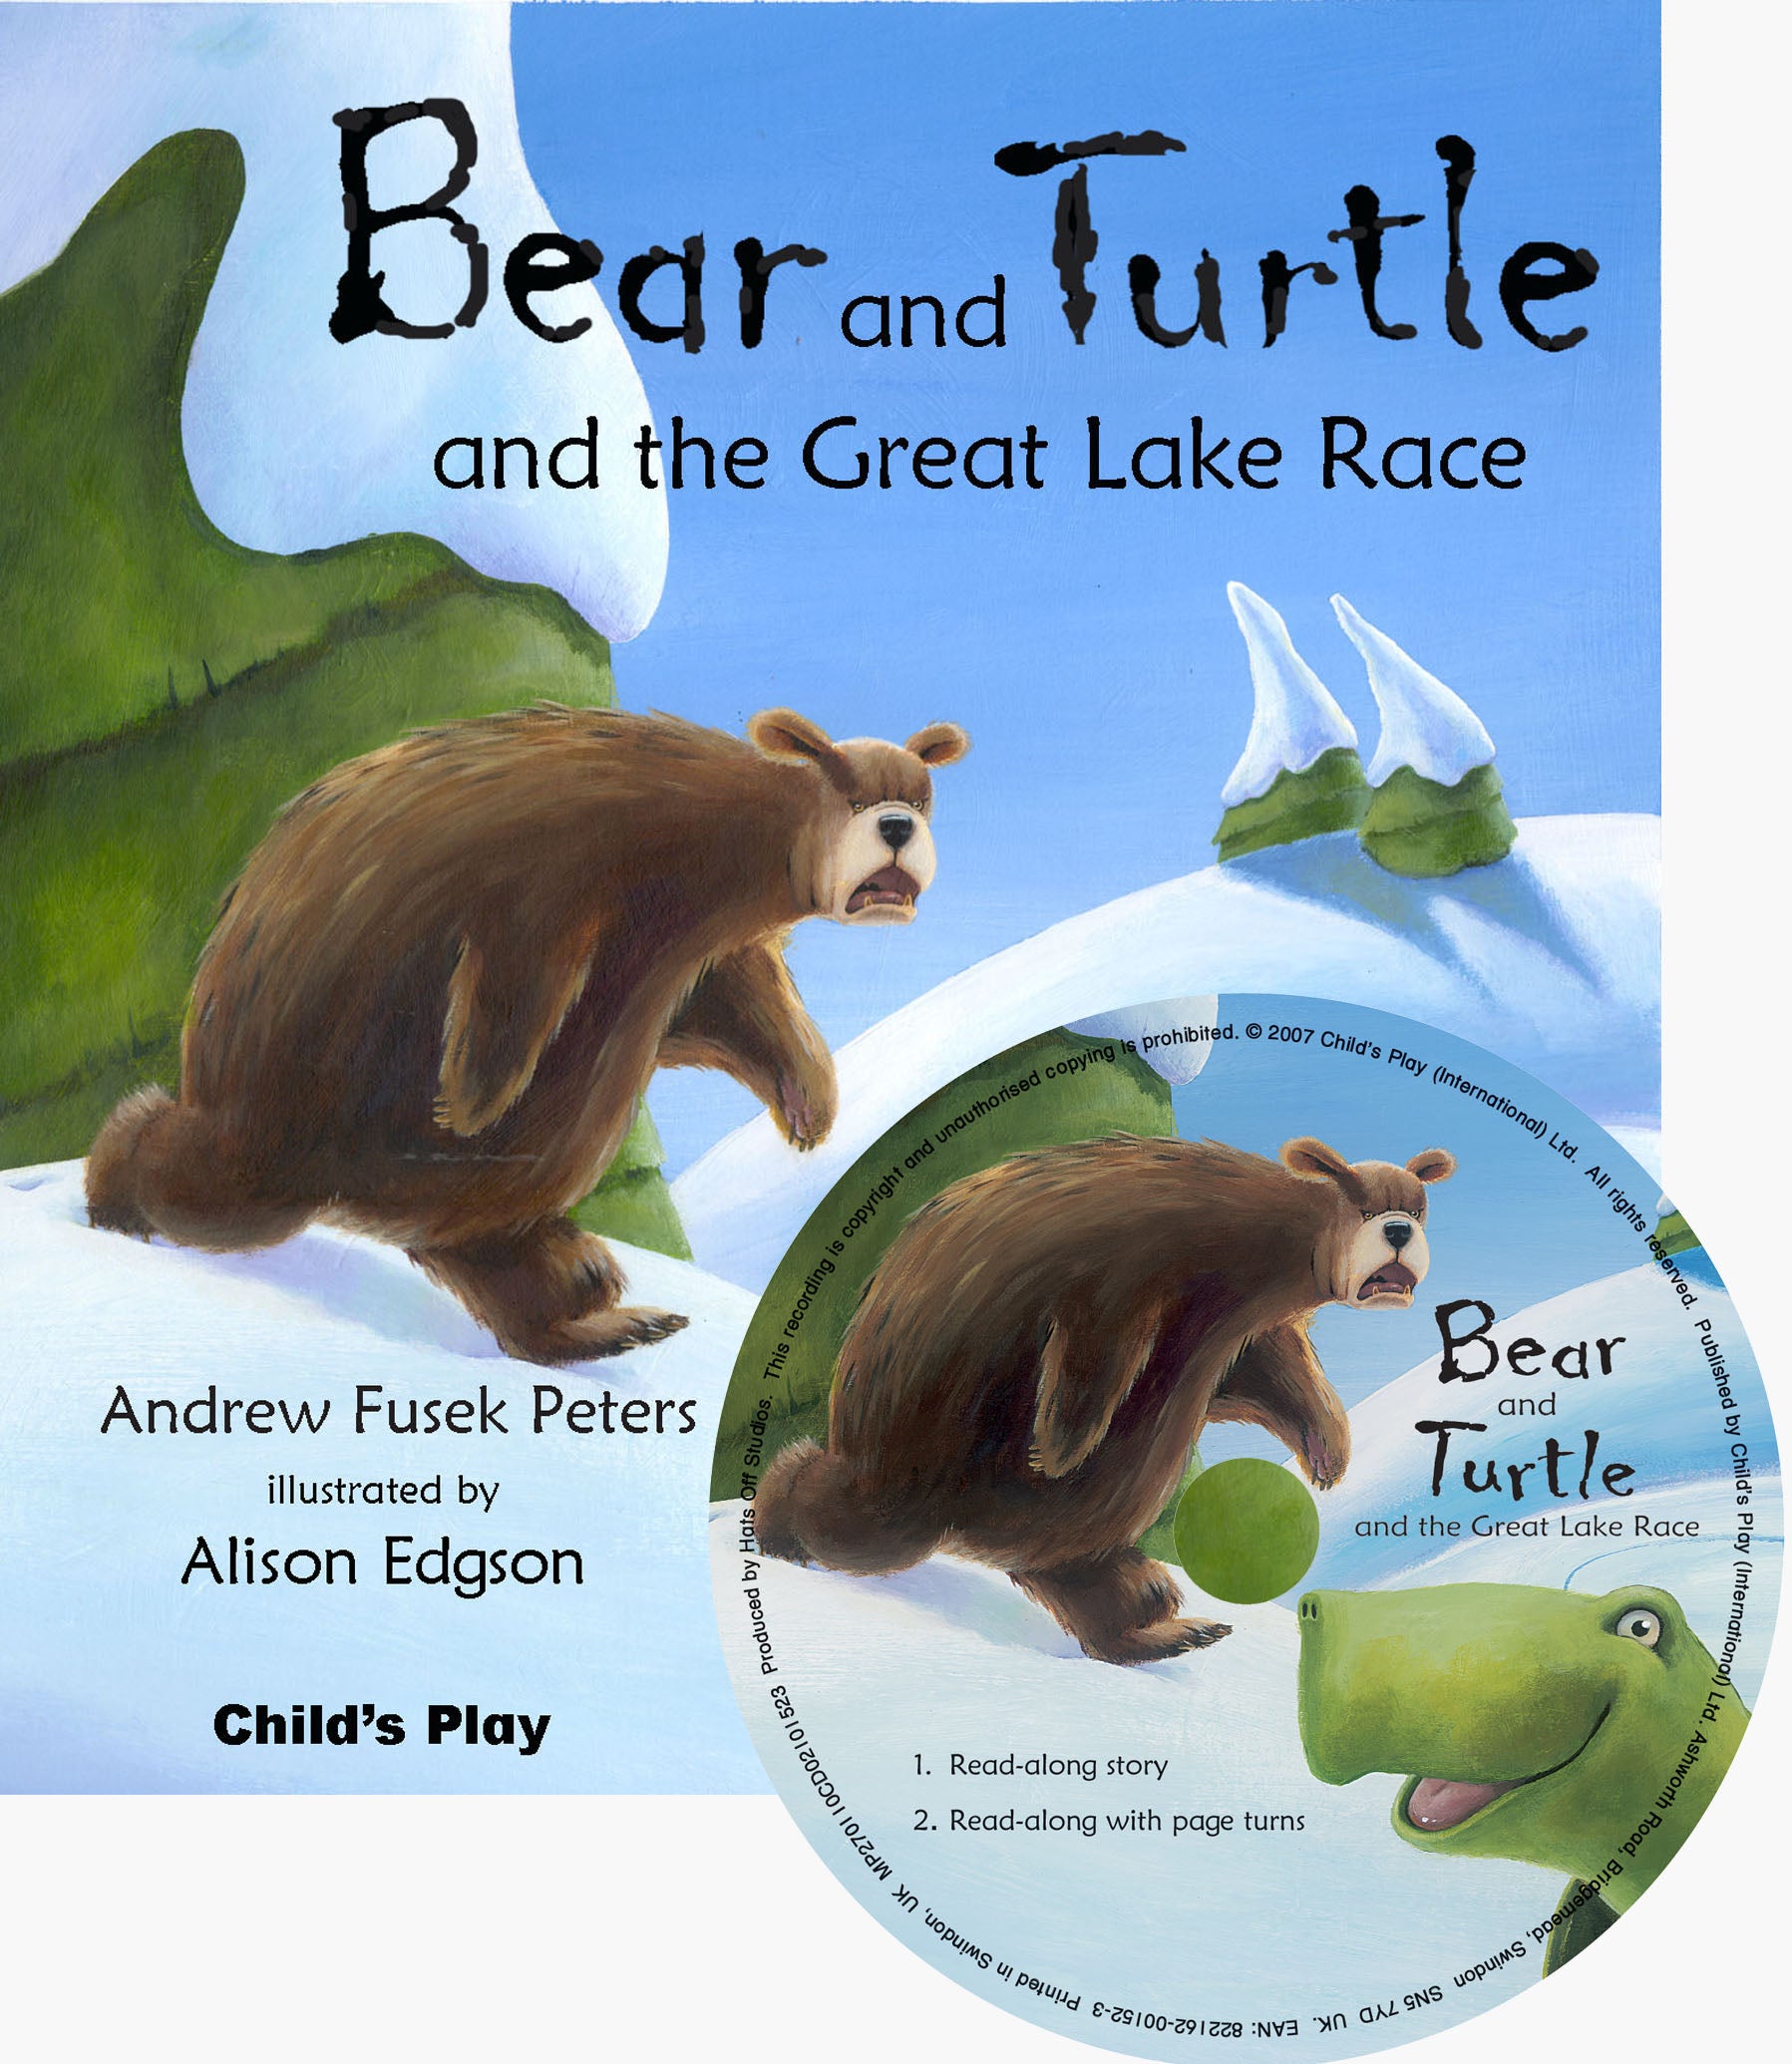 Bear and Turtle and the Great Lake Race (Softcover and CD Edition)